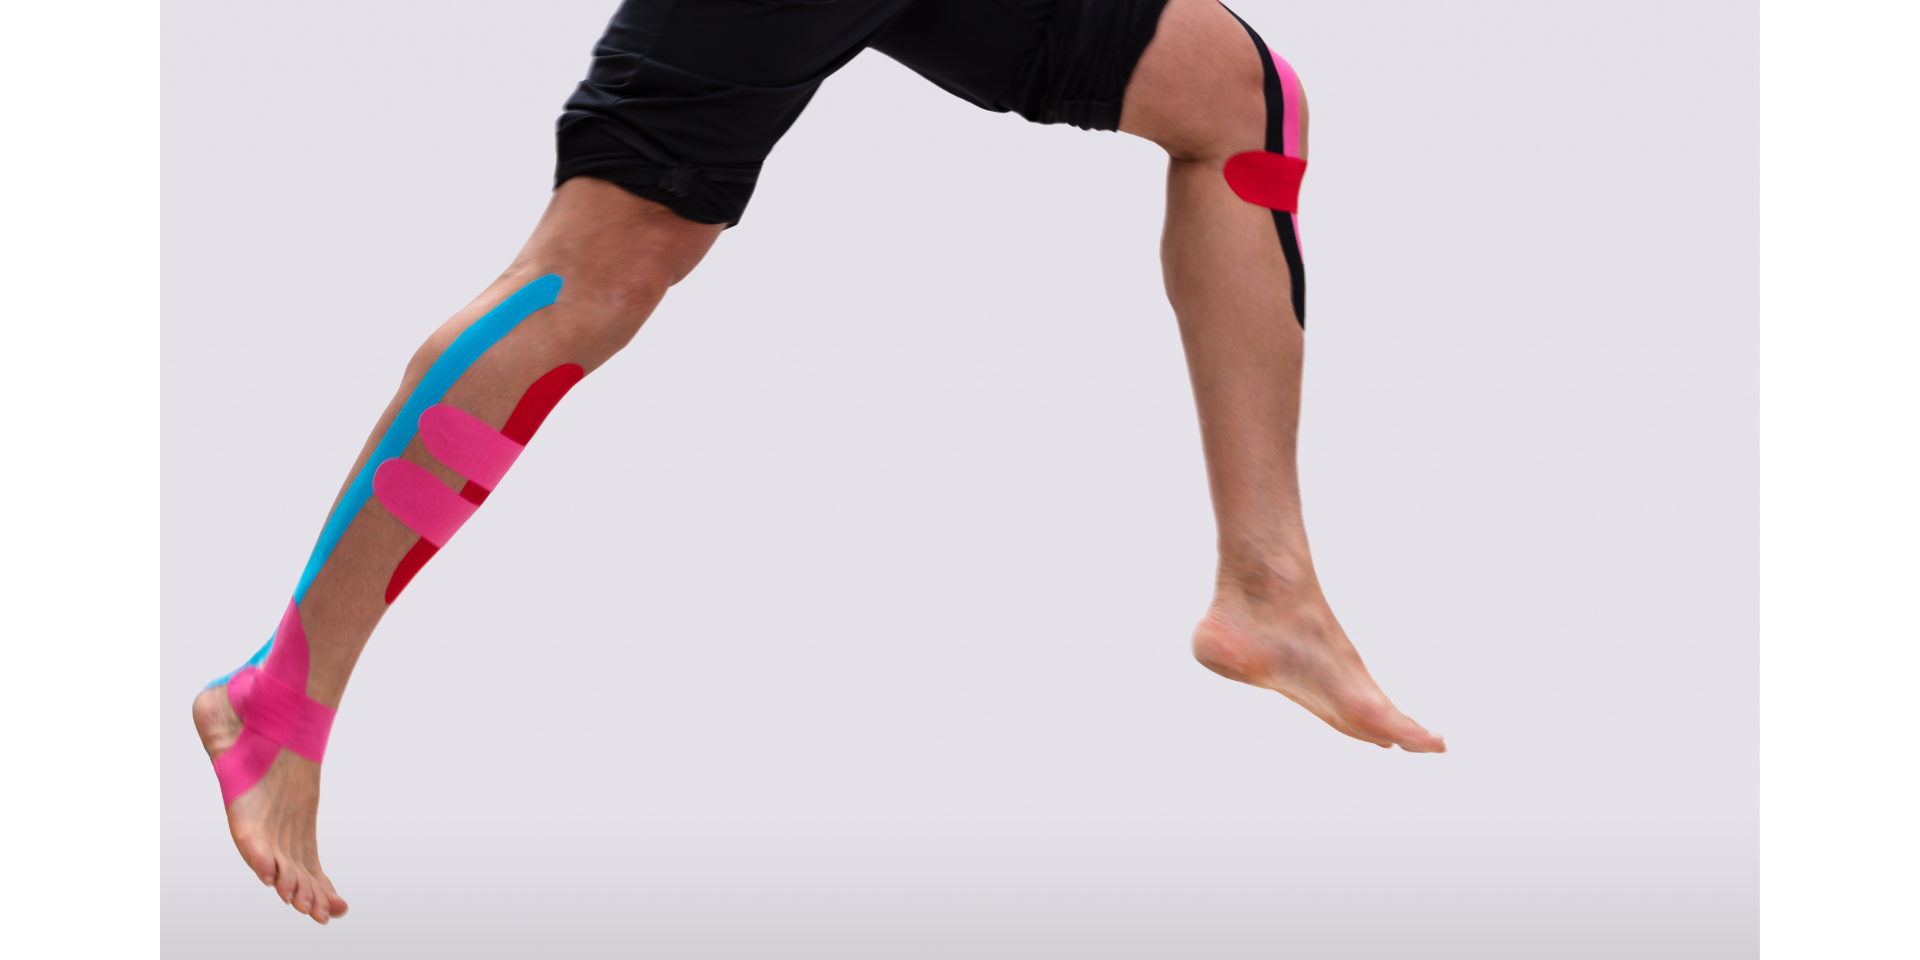 How-To Manage an Ankle Sprain